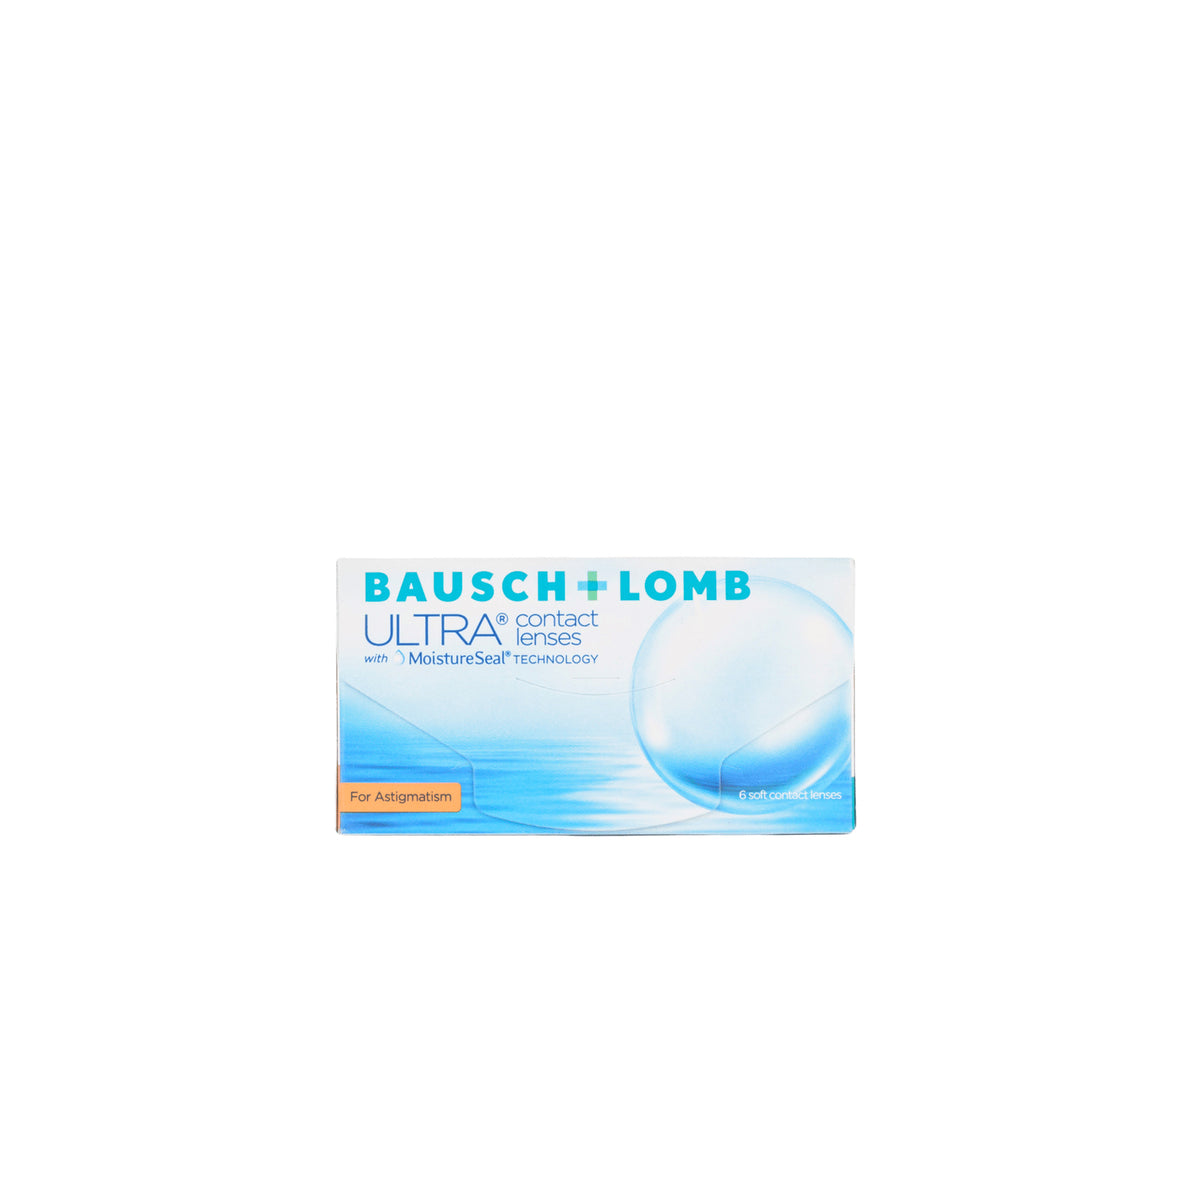 Ultra for Astigmatism 6P Contact Lenses Bausch & Lomb   